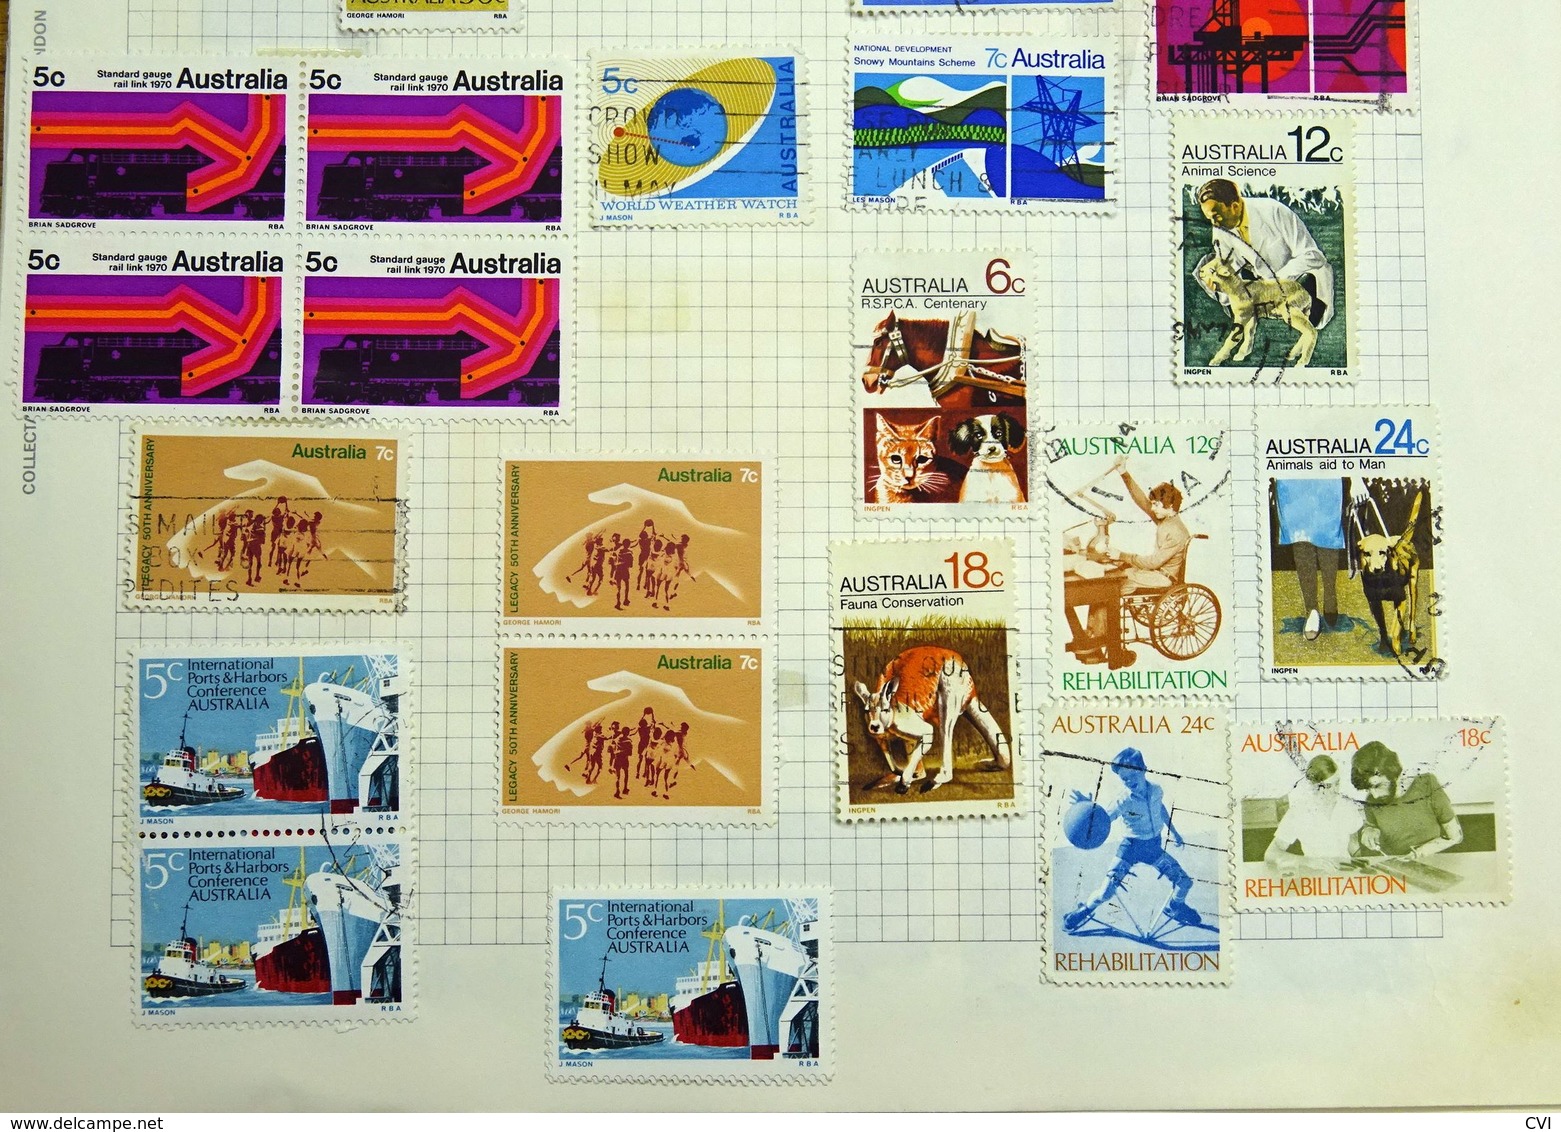 Australia & States Collection, Mint/Used, Errors/Re-Touches, FDC, Coil Stamps, etc.